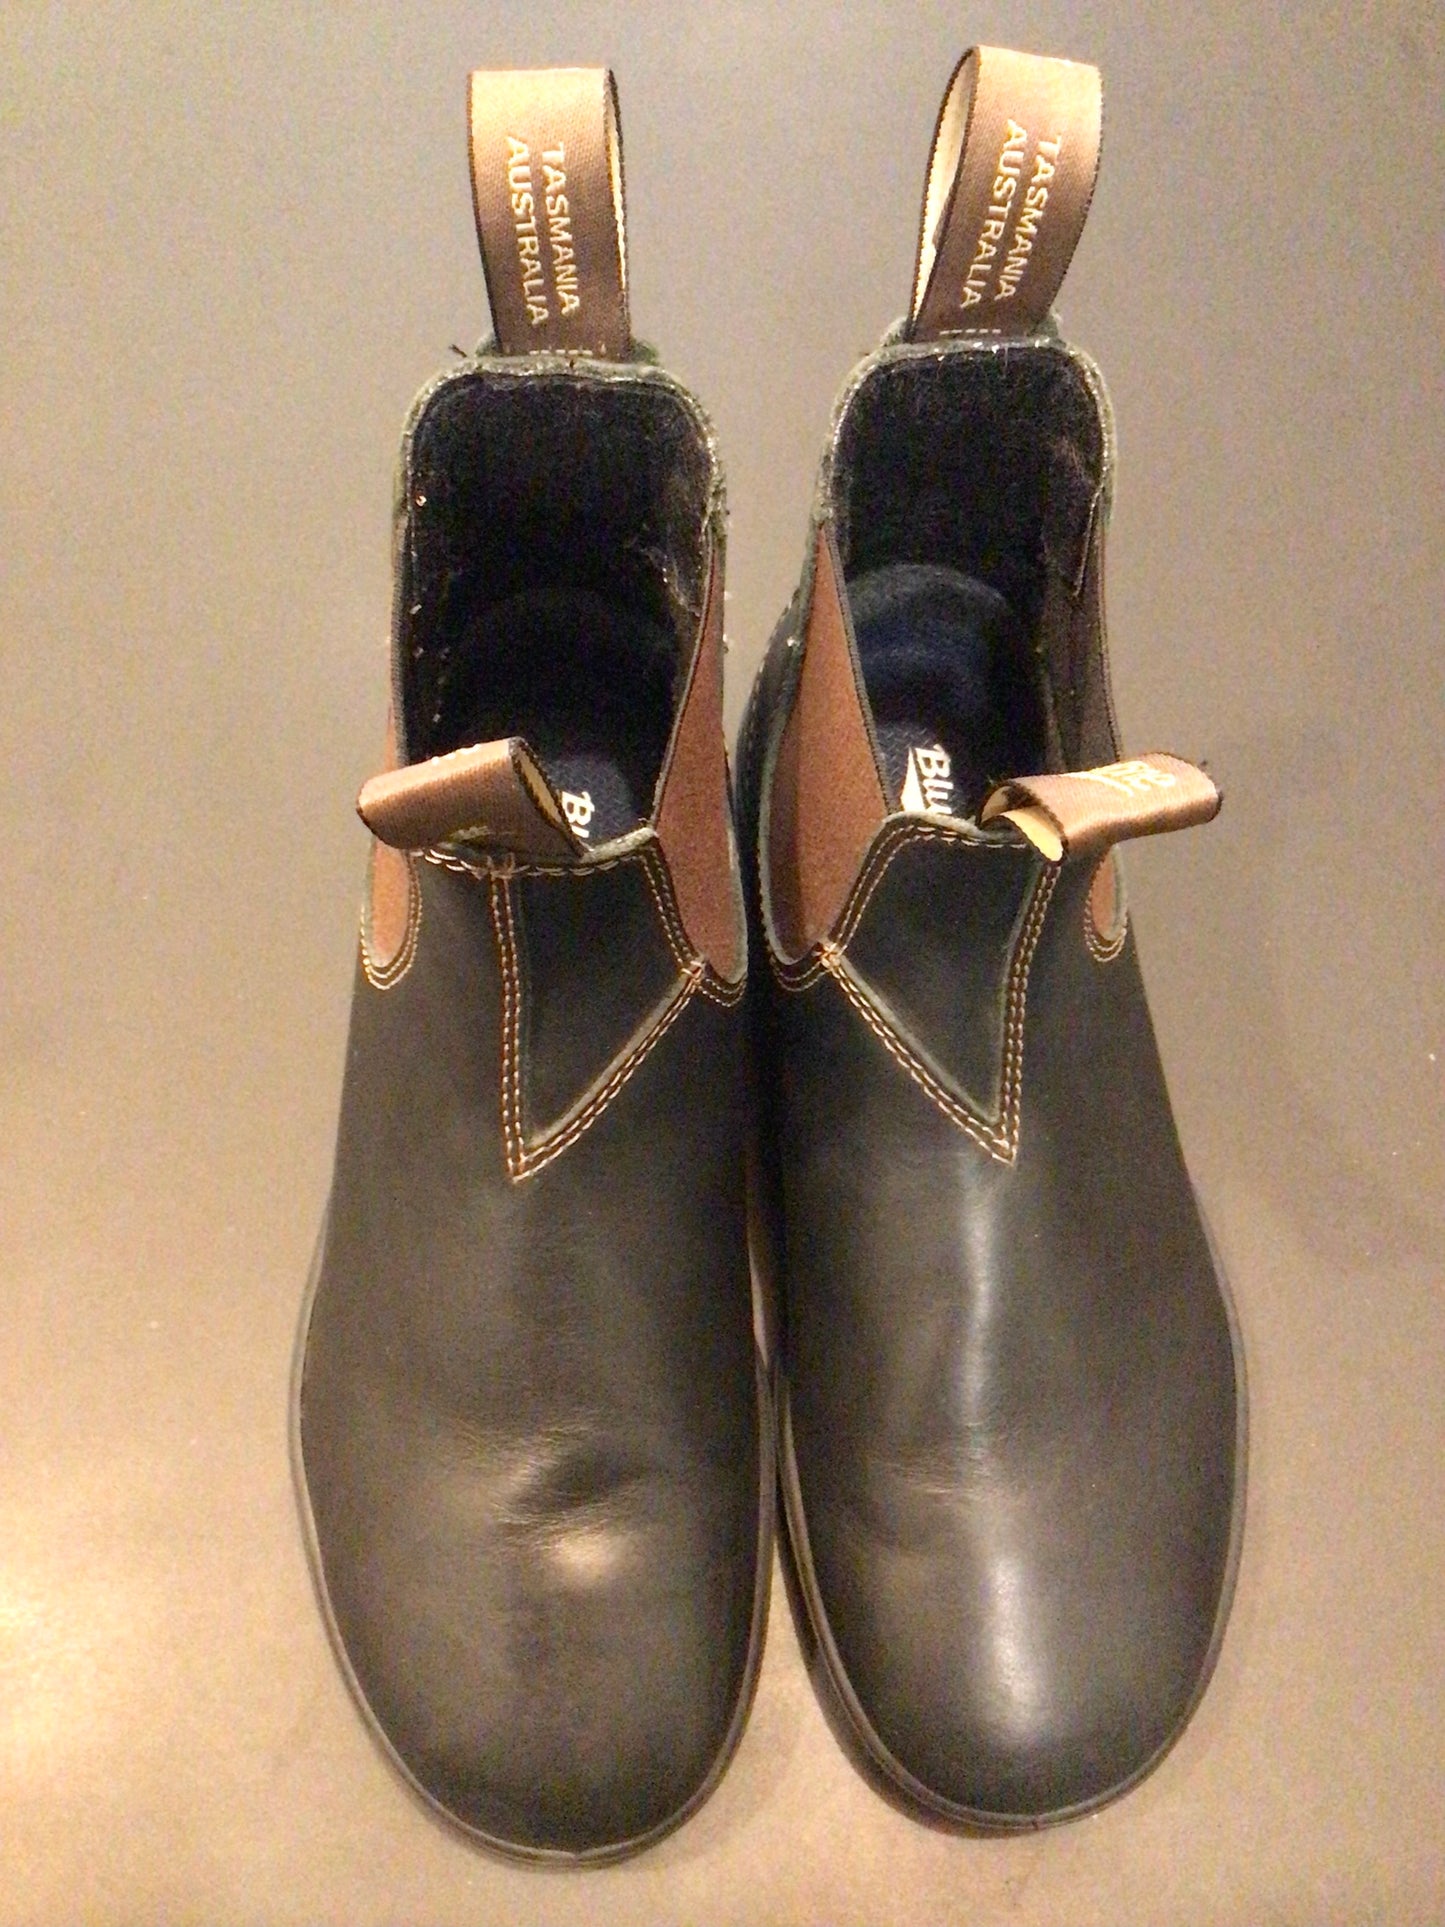 Consignment 7649-01 Blundstones. Black with brown elastic. Aussie size 5.5